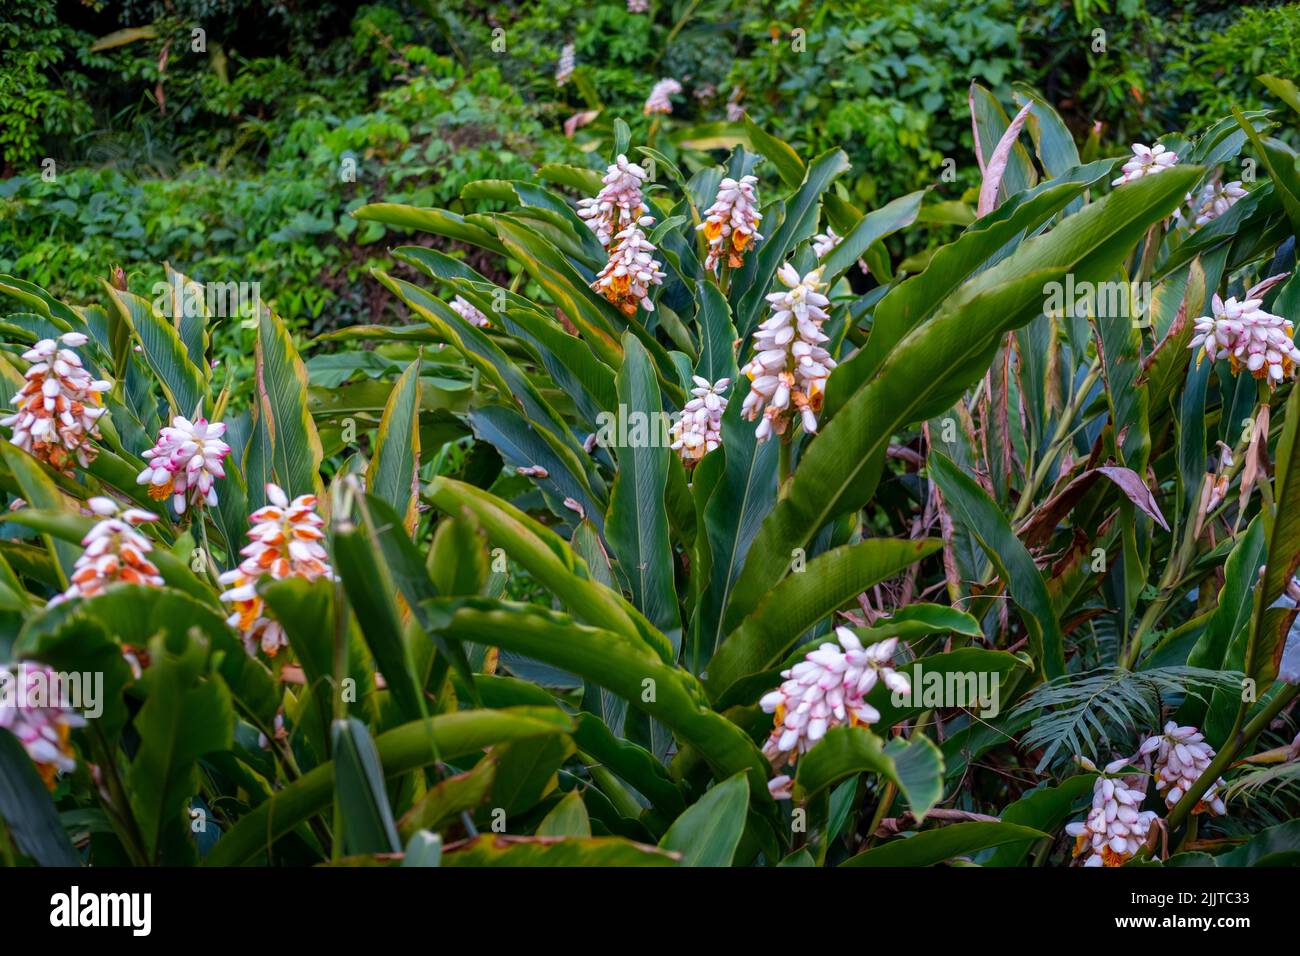 A beautiful view of shell ginger (Alpinia zerumbet) flowers blooming in a garden Stock Photo